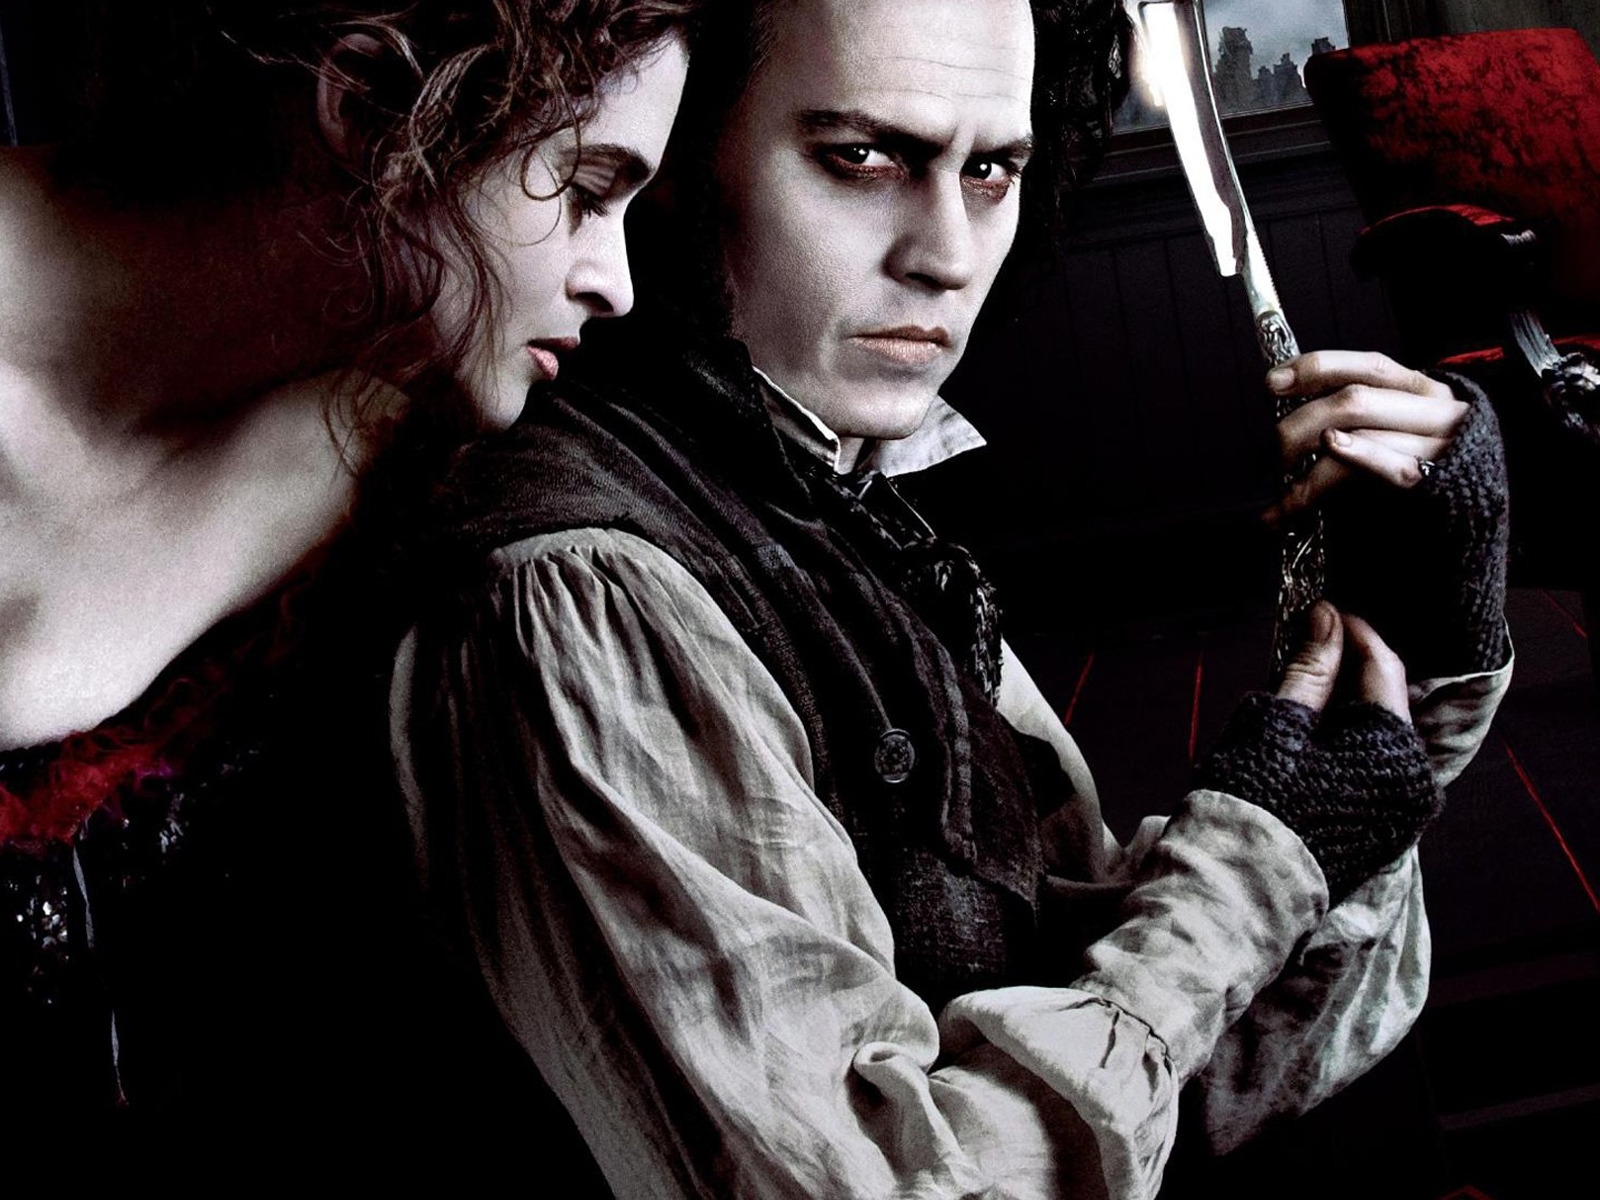 Sweeney Todd for 1600 x 1200 resolution